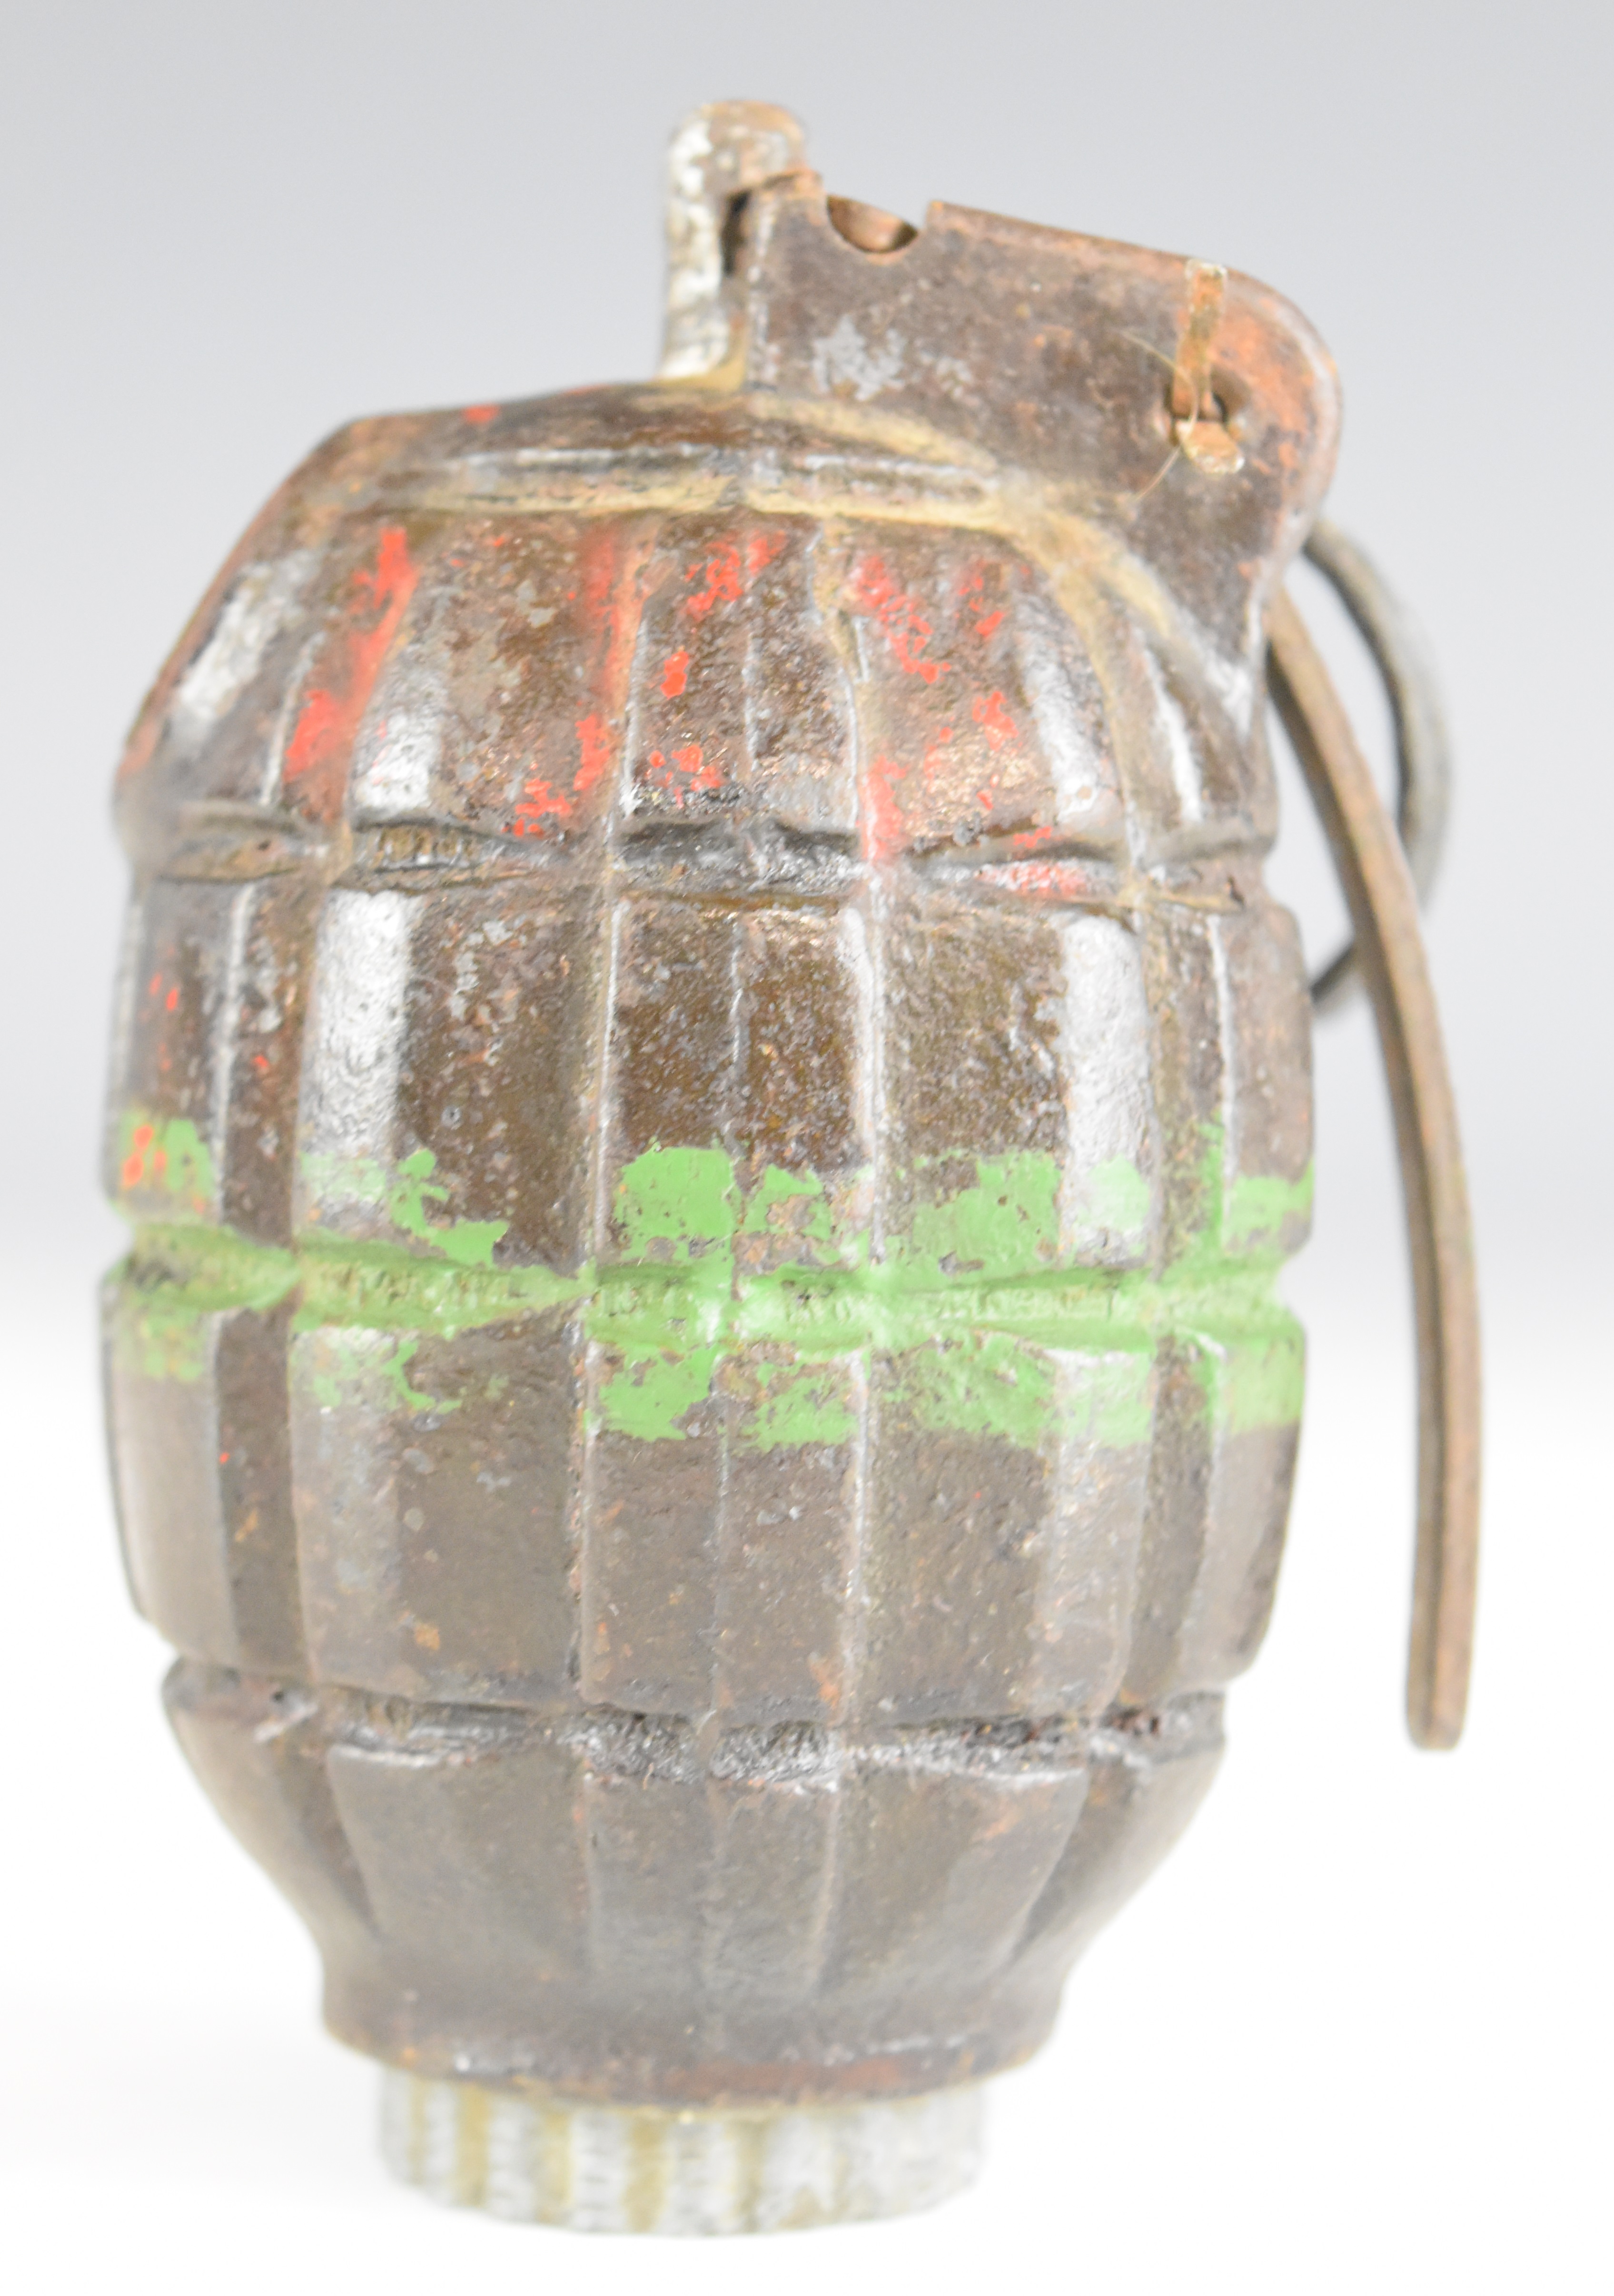 British WW2 inert Mills bomb / grenade stamped No 6 MZ MK I and SRD to alloy screw in base - Image 4 of 10